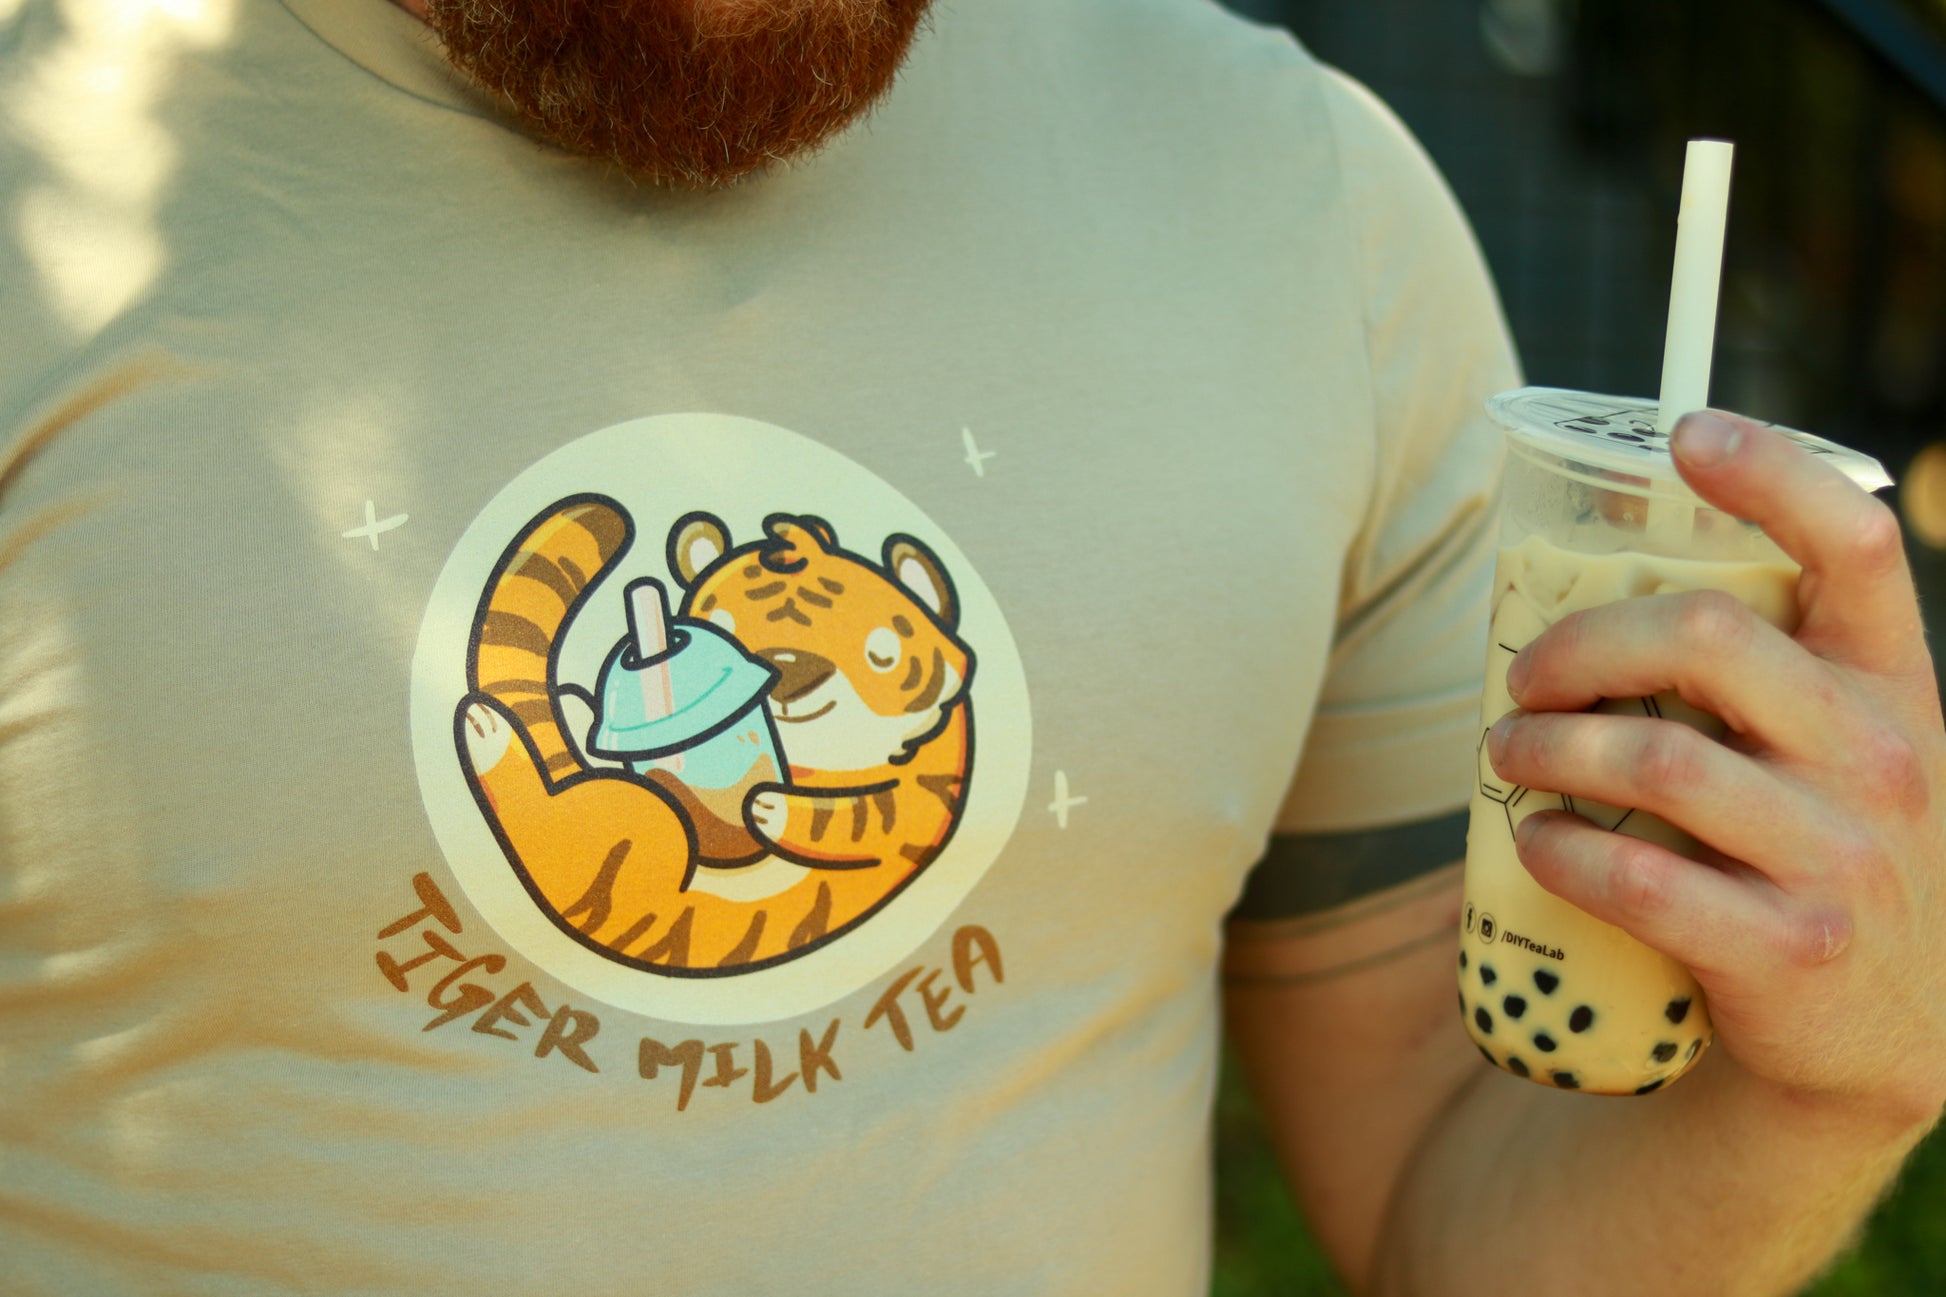 Close up of chest with hand holding bubble tea, person is wearing tan shirt featuring  image of tiger holding bubble tea, with the words tiger milk tea underneath.